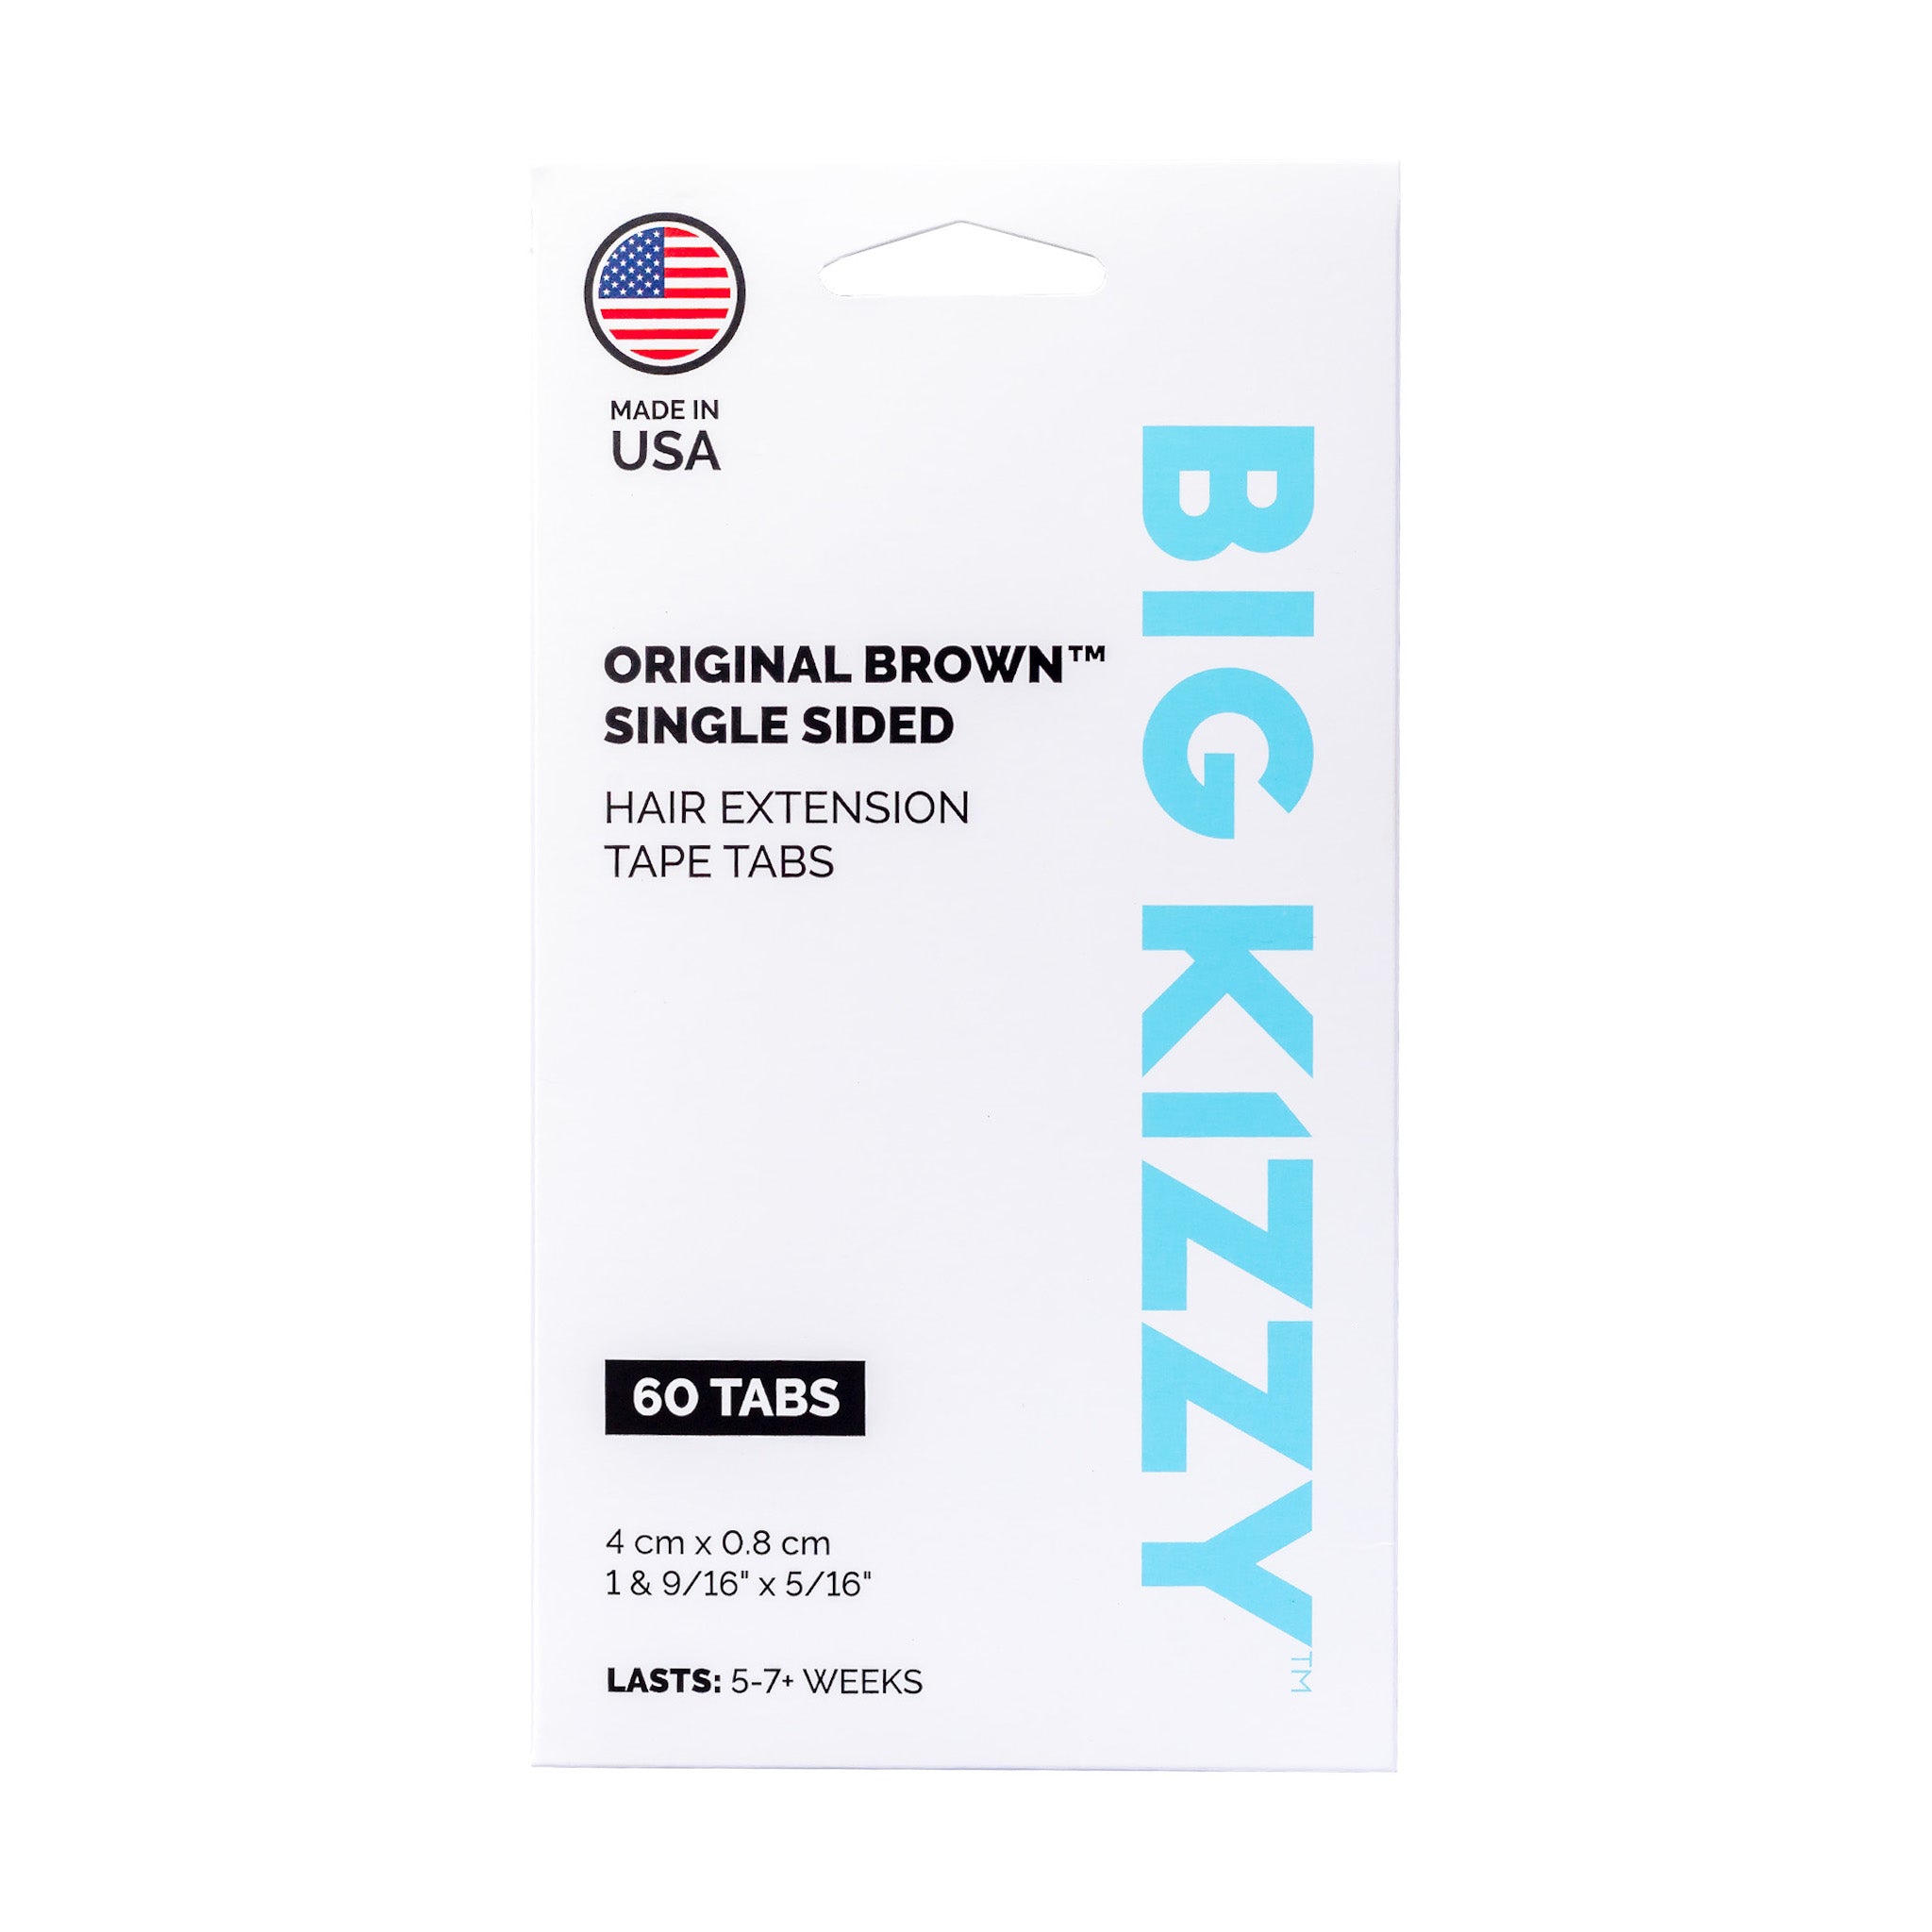 A pack of Big Kizzy® Original Brown Single Sided Hair Extension Replacement Tape Tabs, 60 tabs